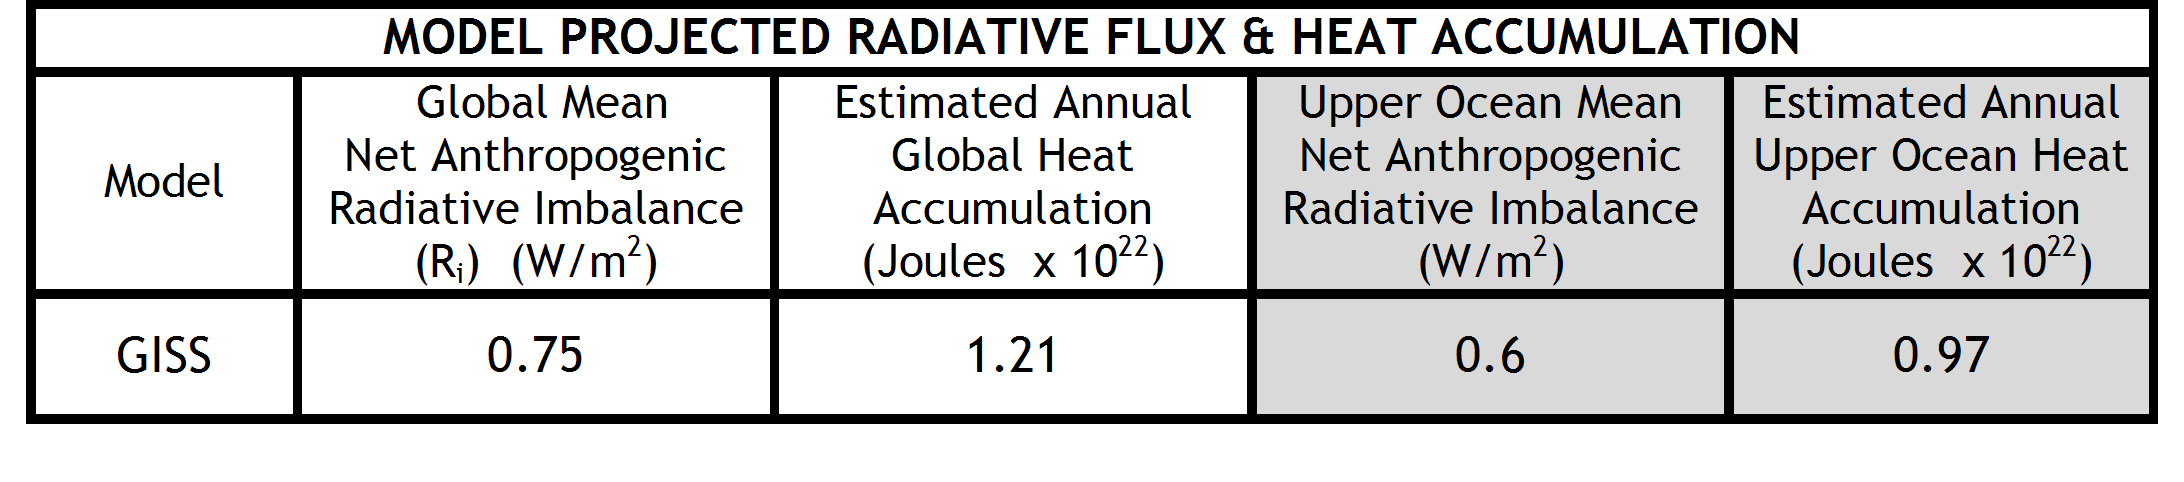 projected radiative flux and heat accumulation